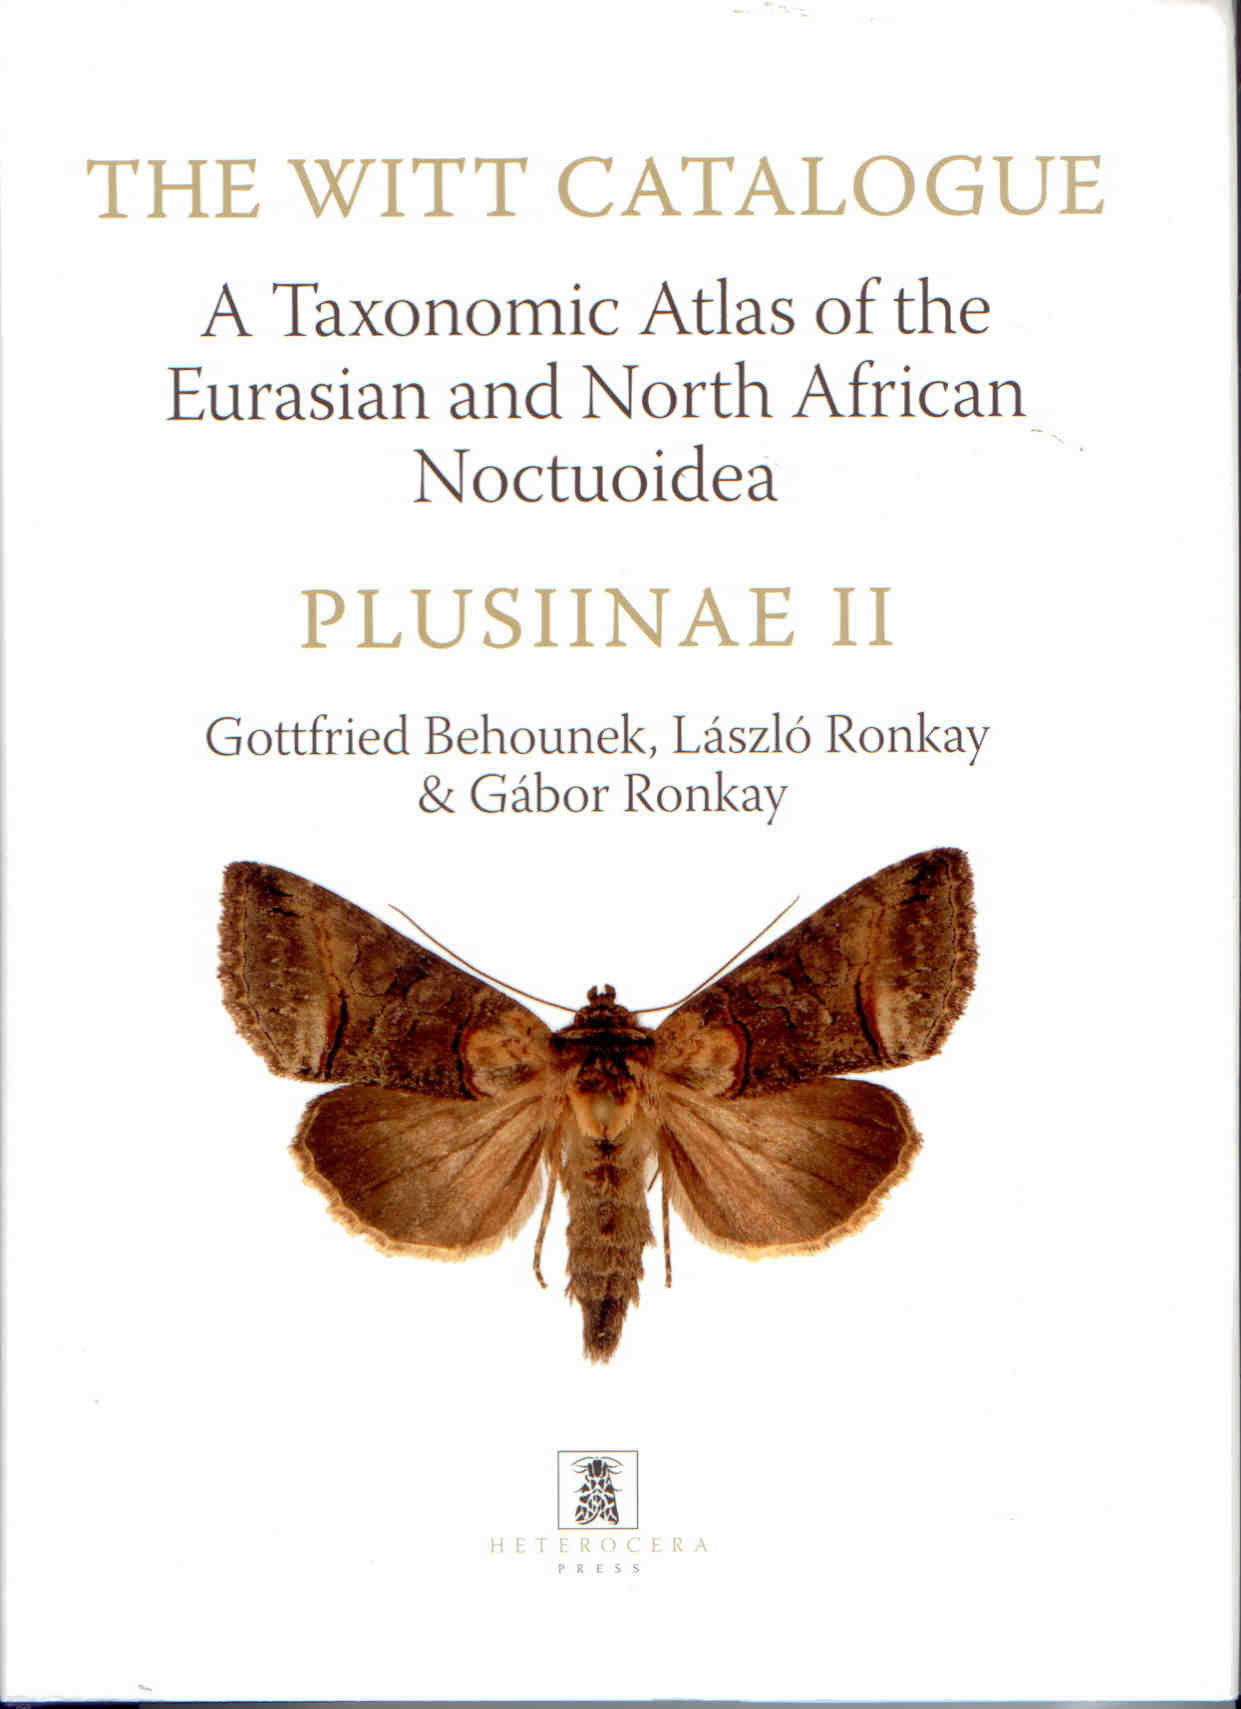 Behounek, G.; Ronkay, L.; Ronkay, G. - The Witt Catalogue Vol. 4: A Taxonomic Atlas of the Eurasian and North African Noctuoidea: Plusiinae 2